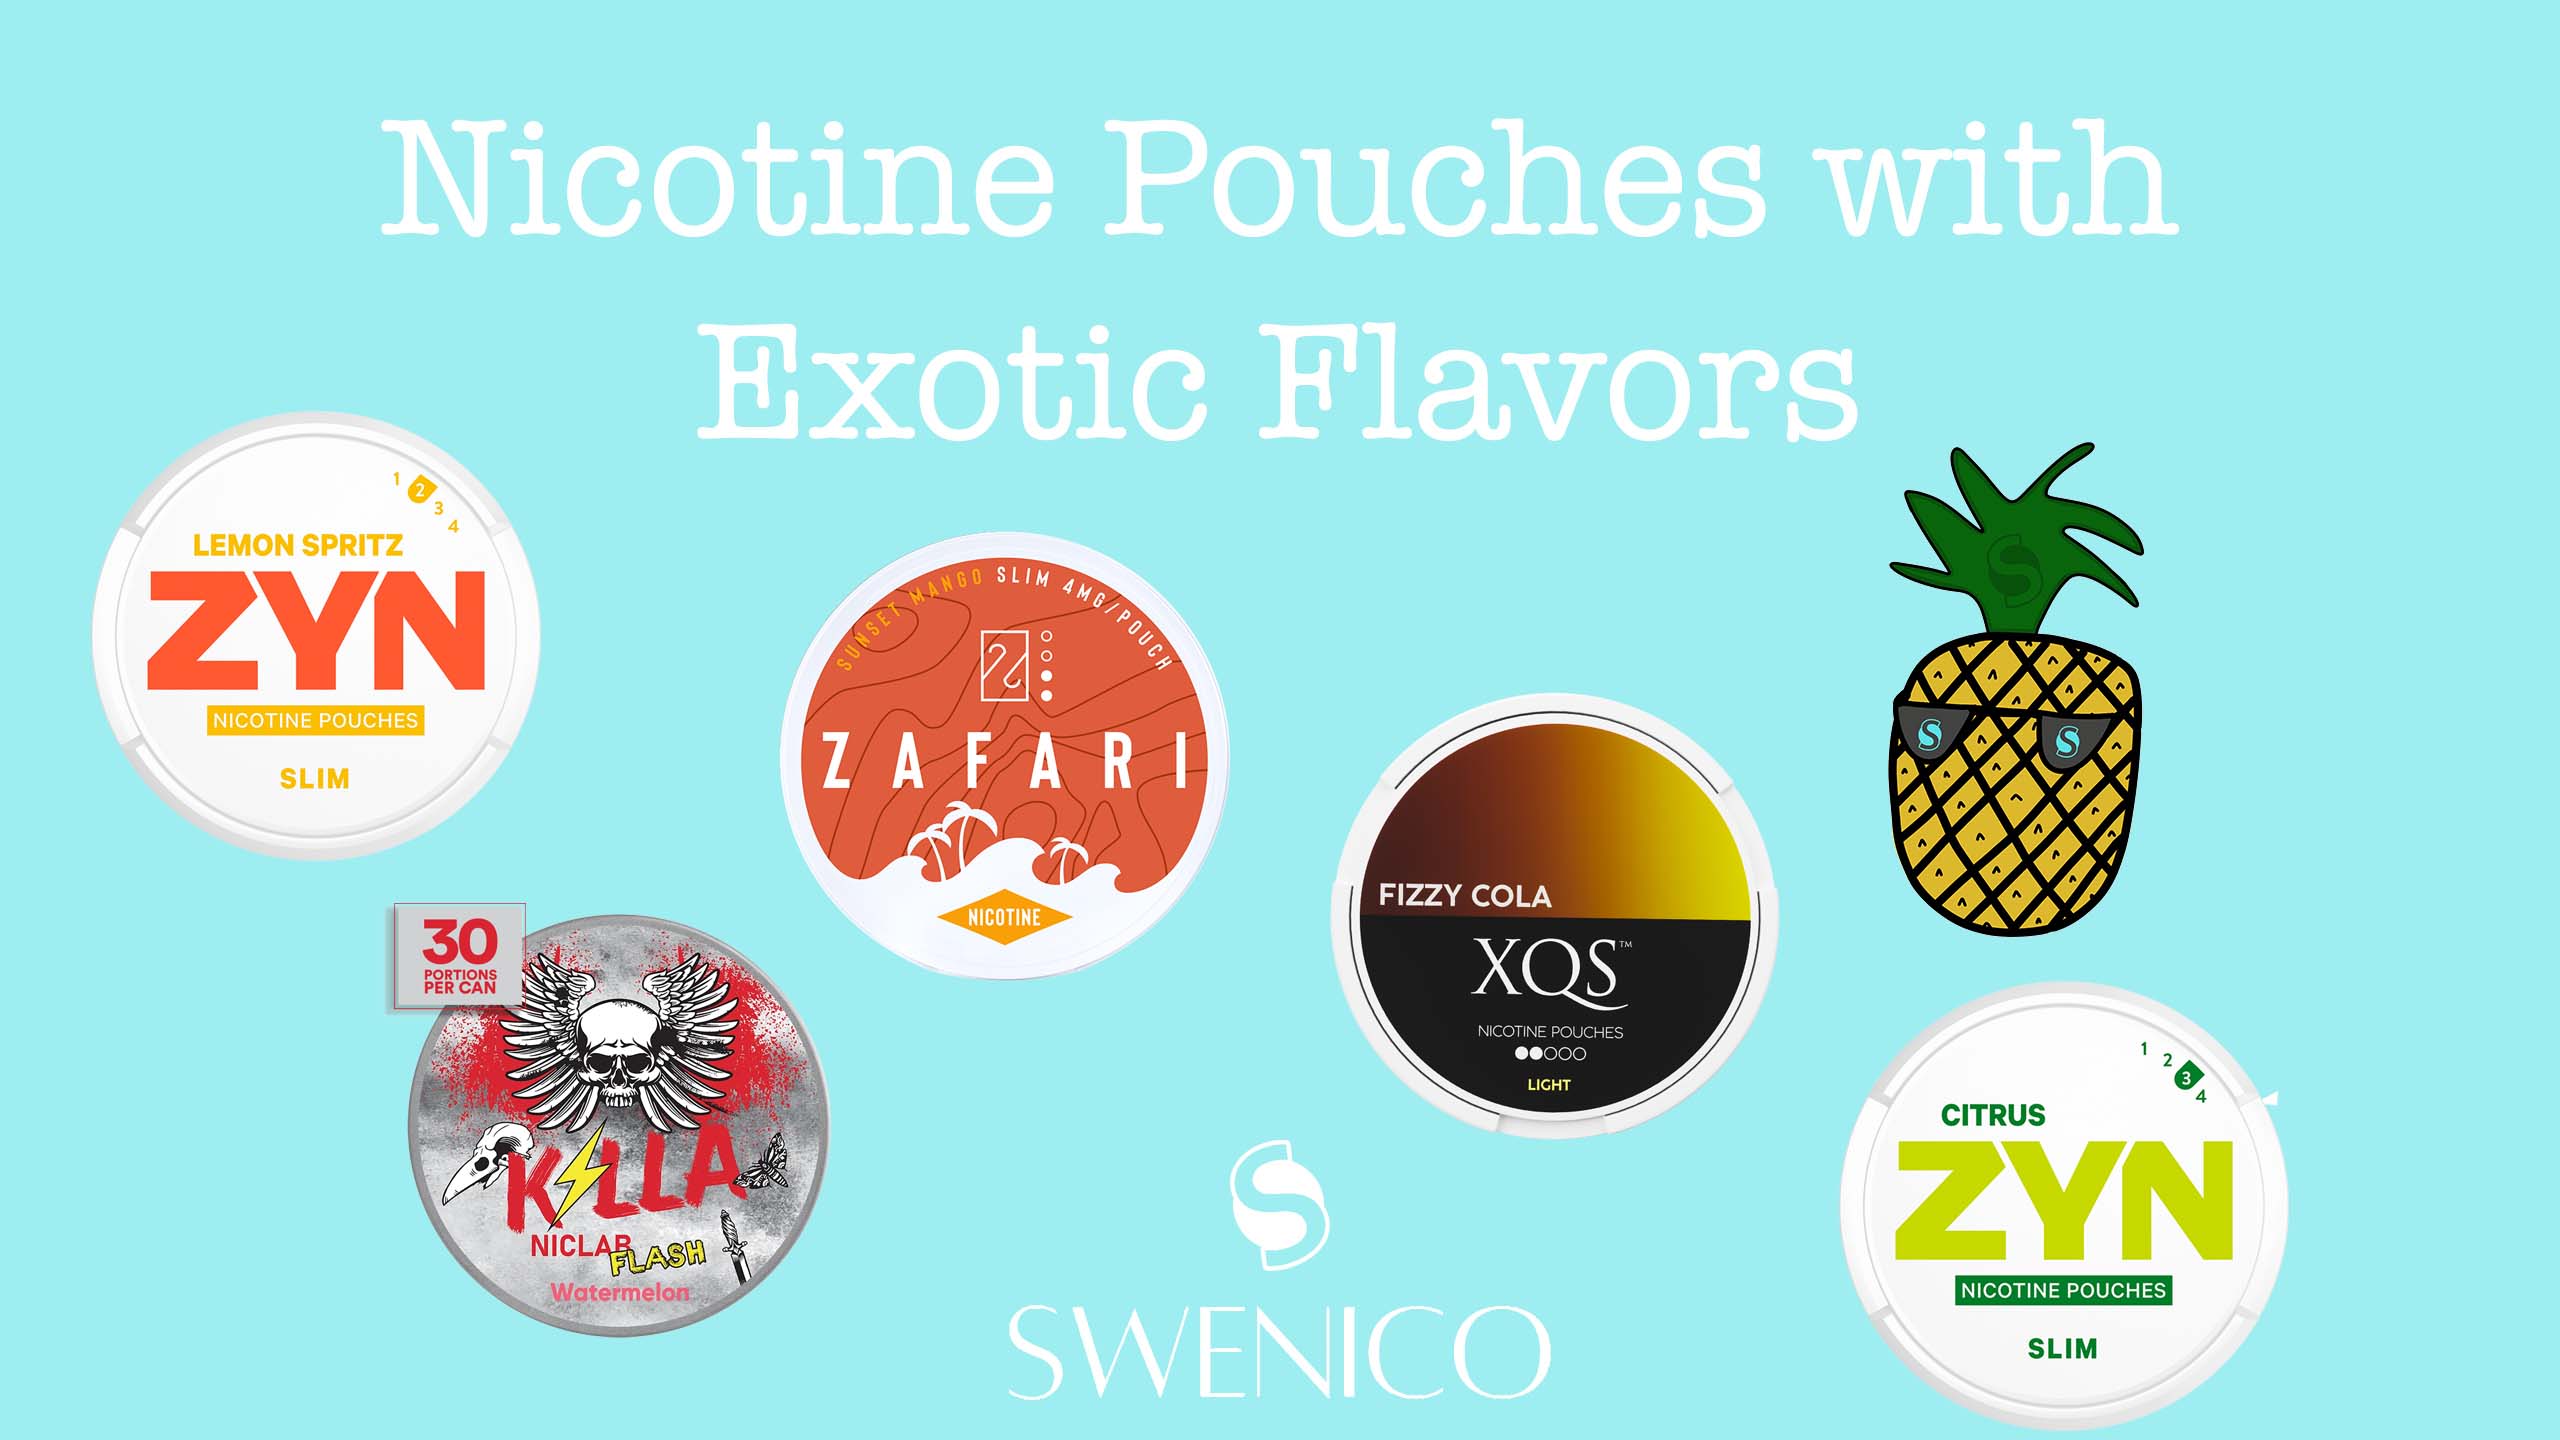 Top 10 Nicotine Pouches with Exotic Flavors -Swenico Recommends